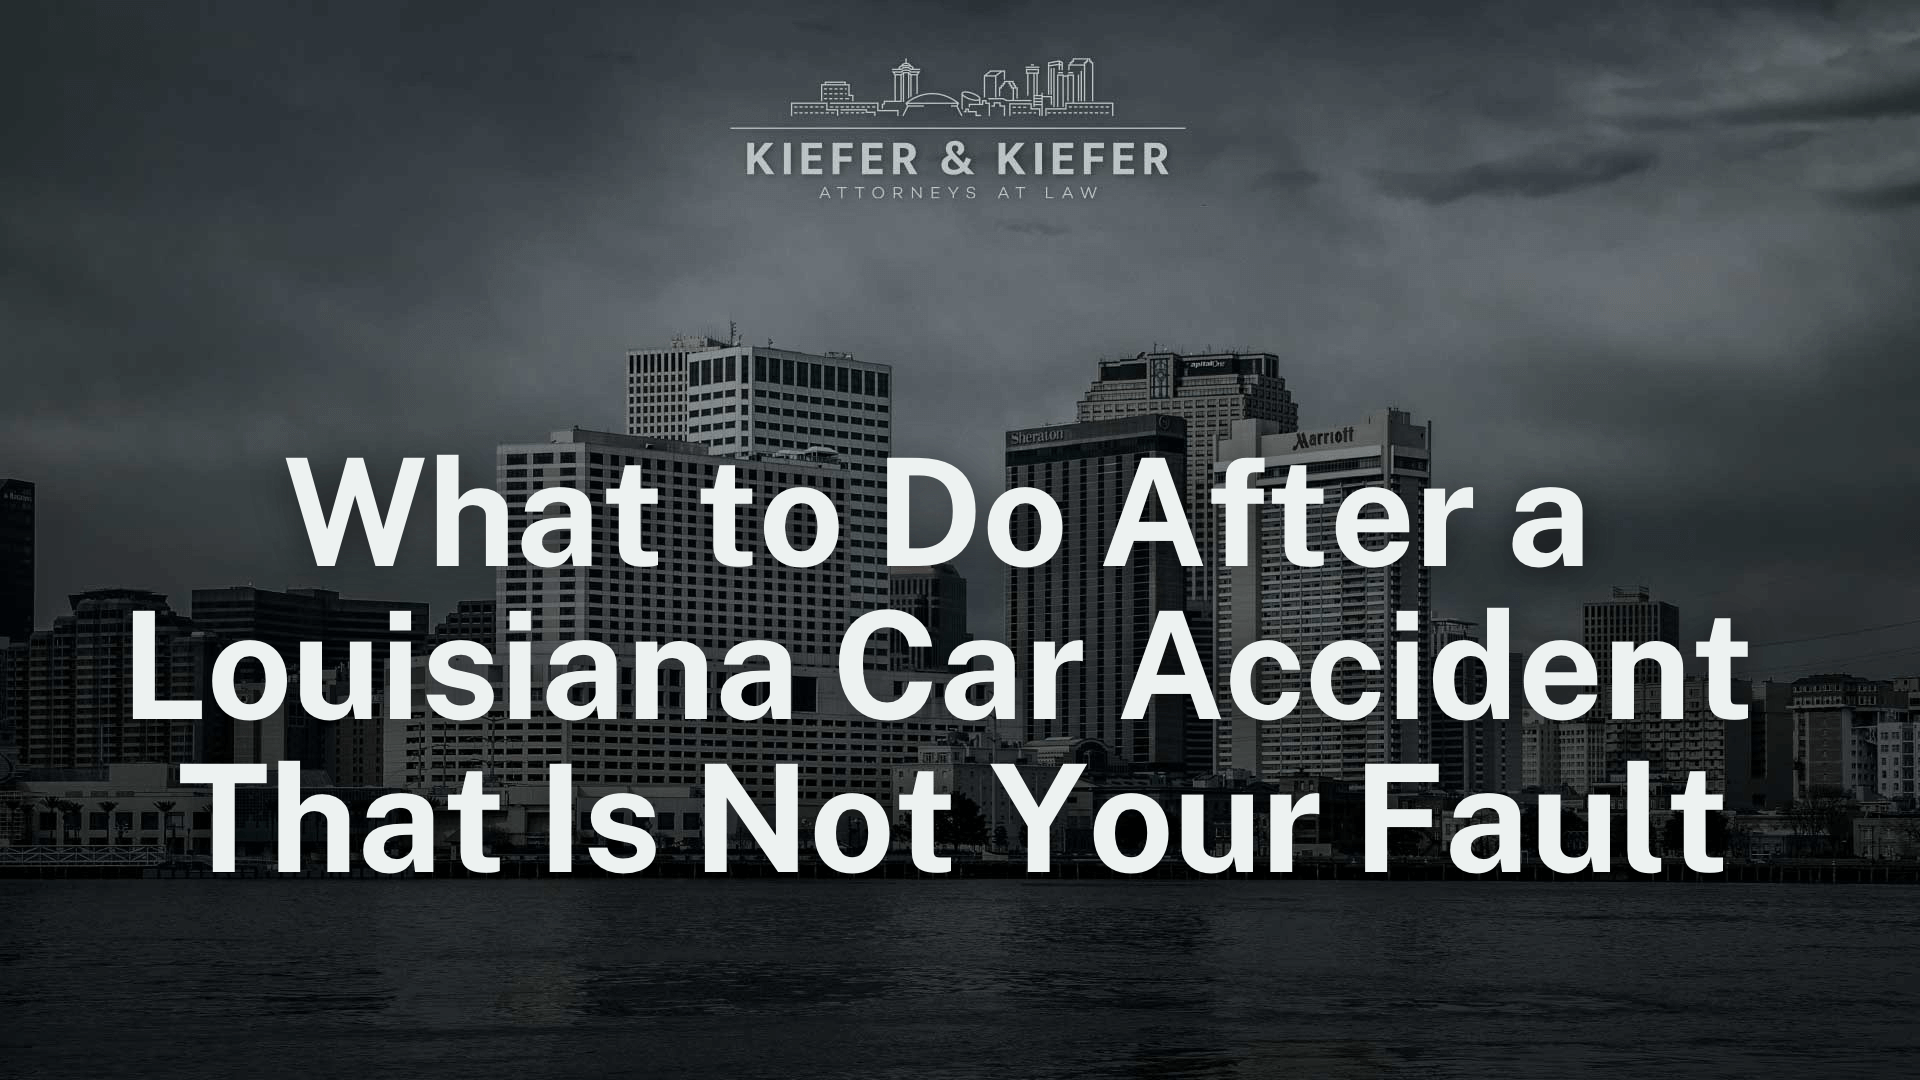 What to Do After a Louisiana Car Accident That Is Not Your Fault - Kiefer & Kiefer New Orleans Personal Injury Attorneys